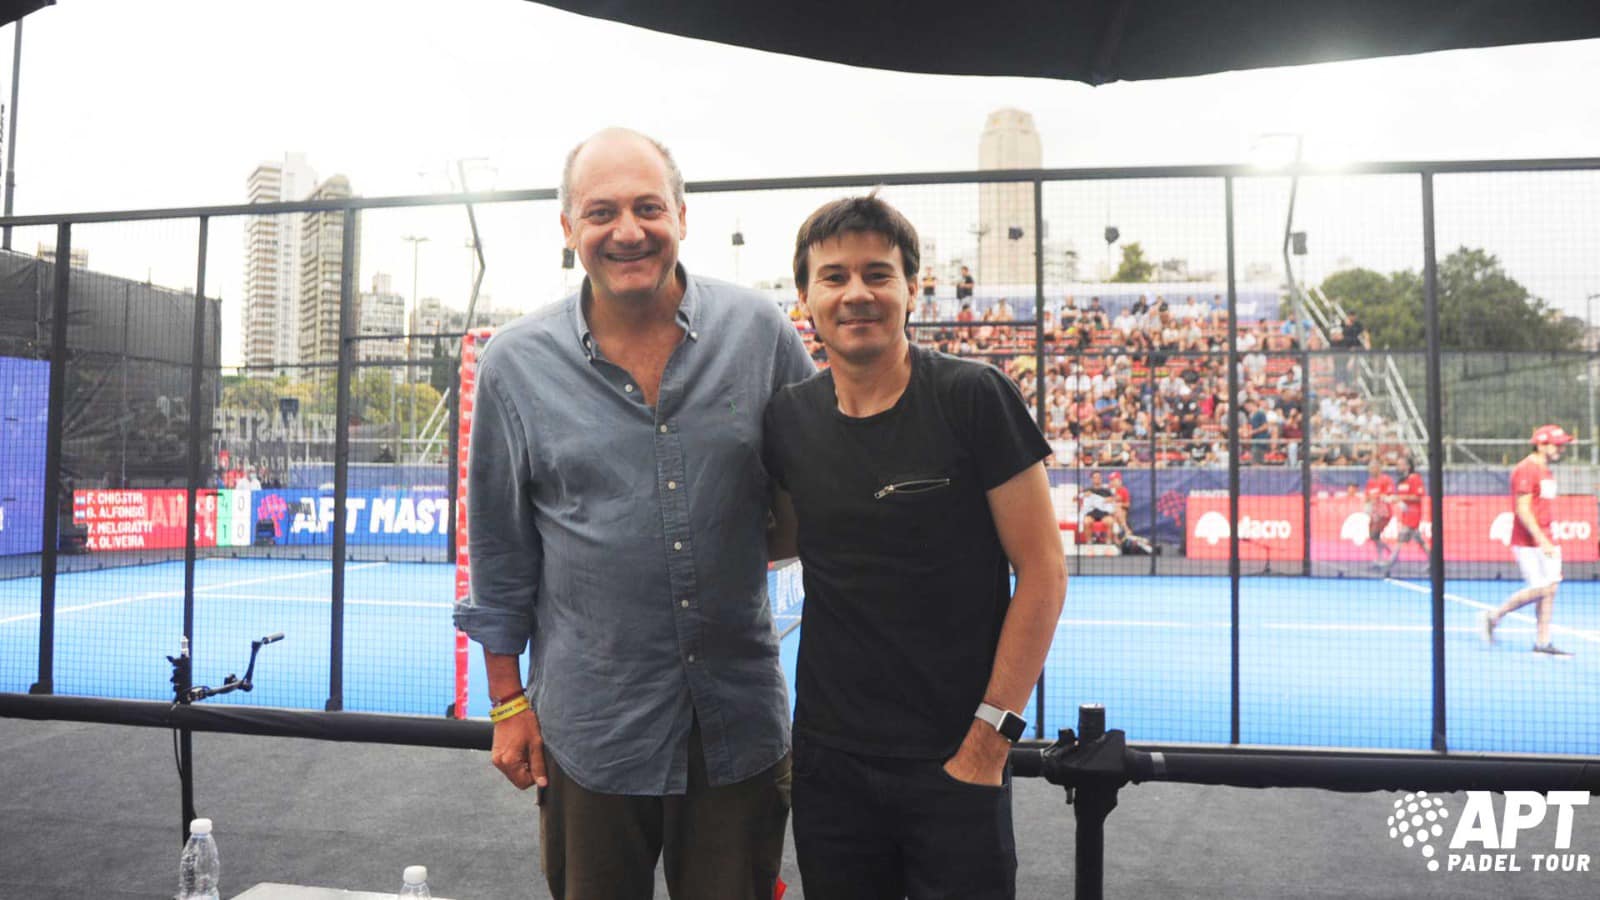 Guillermo Coria seen at the APT Padel Tour